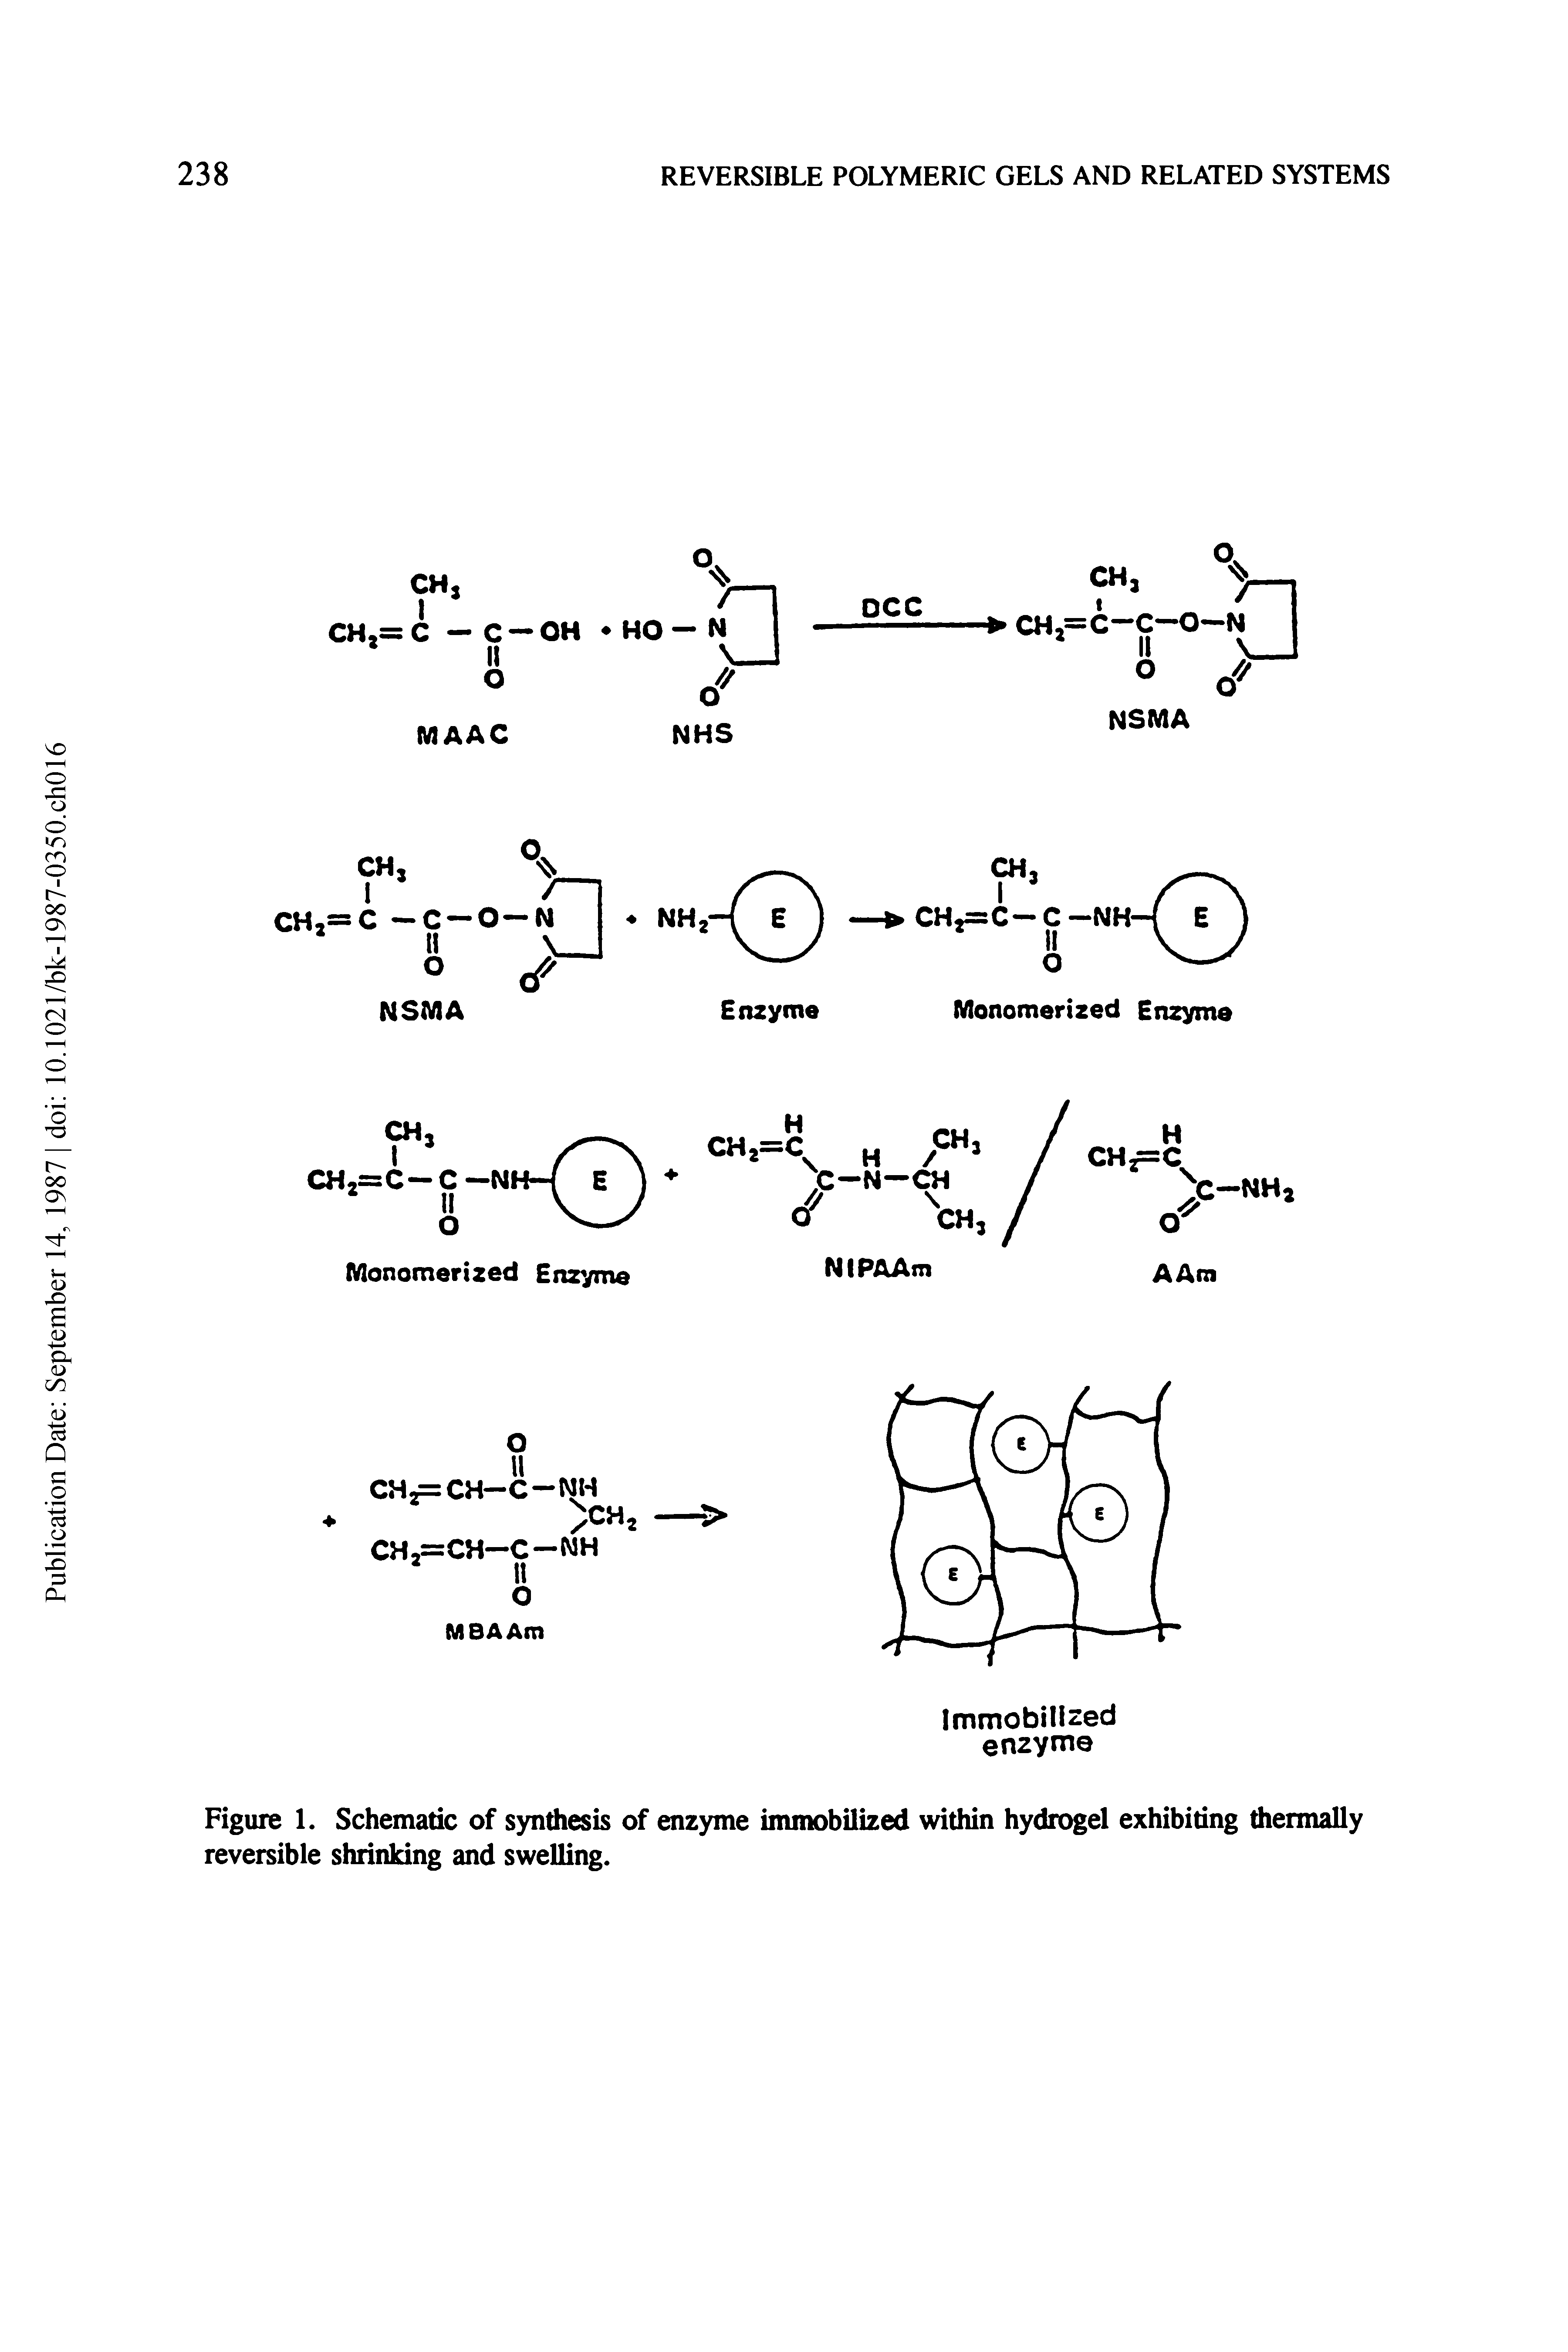 Figure 1. Schematic of synthesis of enzyme immobilized within hydrogel exhibiting thermally reversible shrinking and swelling.